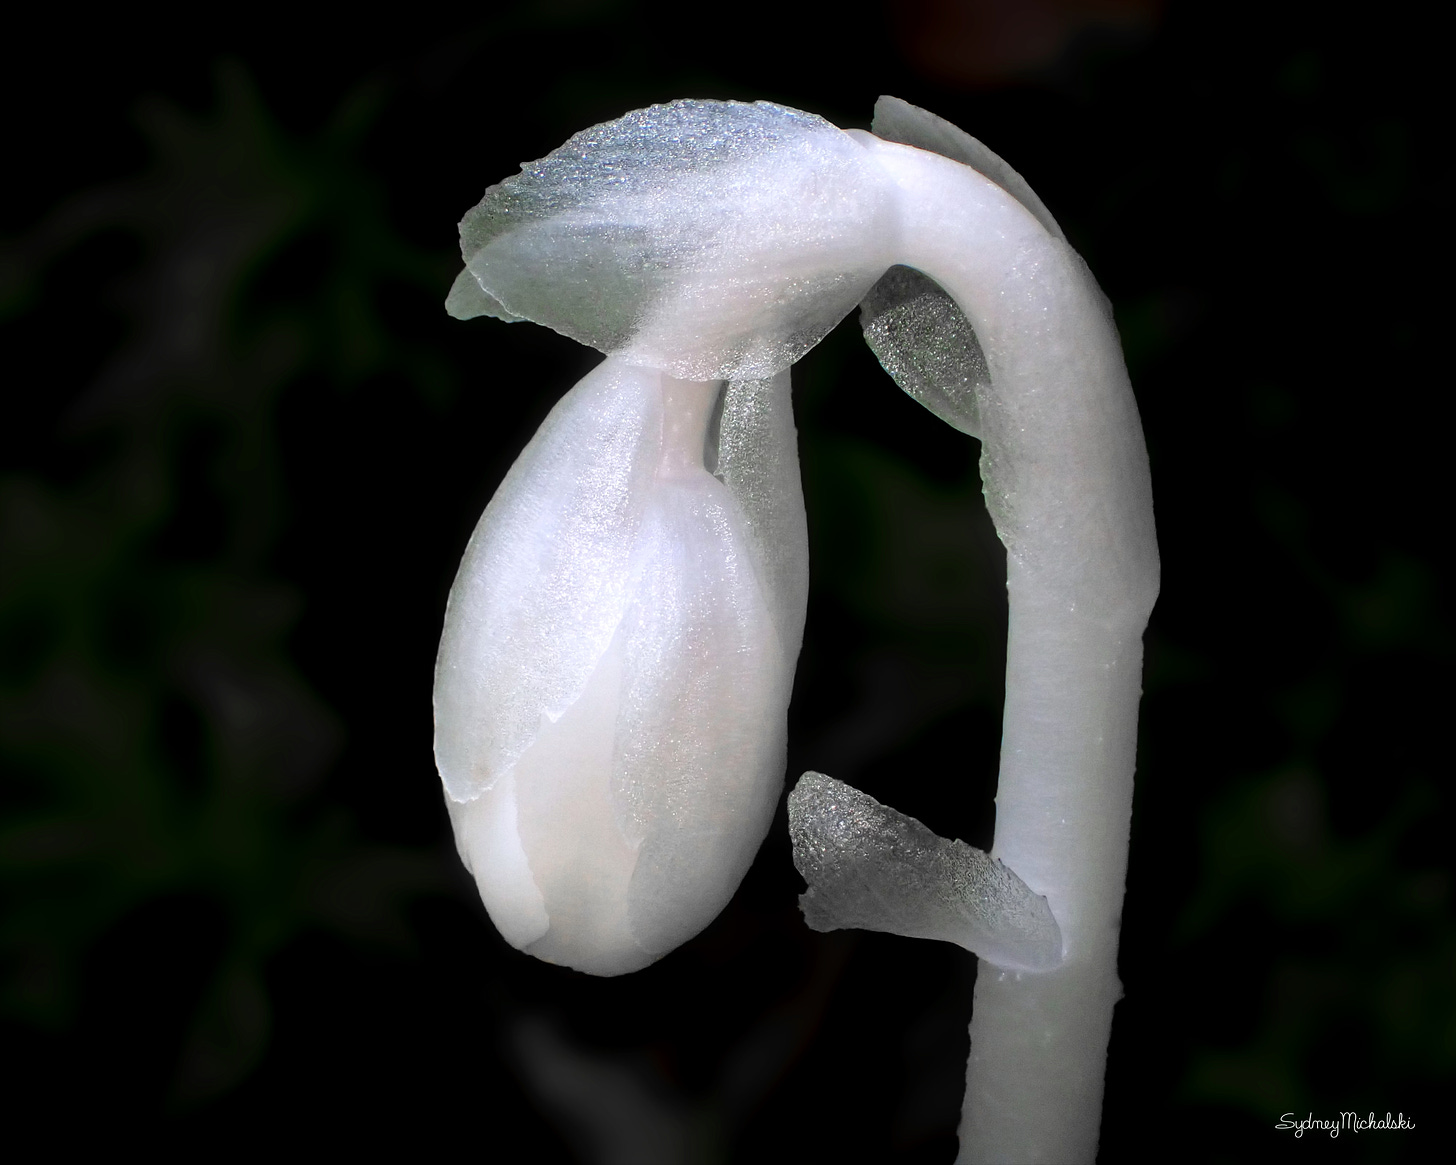 A close-up of a Ghost Plant features a shimmery white bud against a black background.